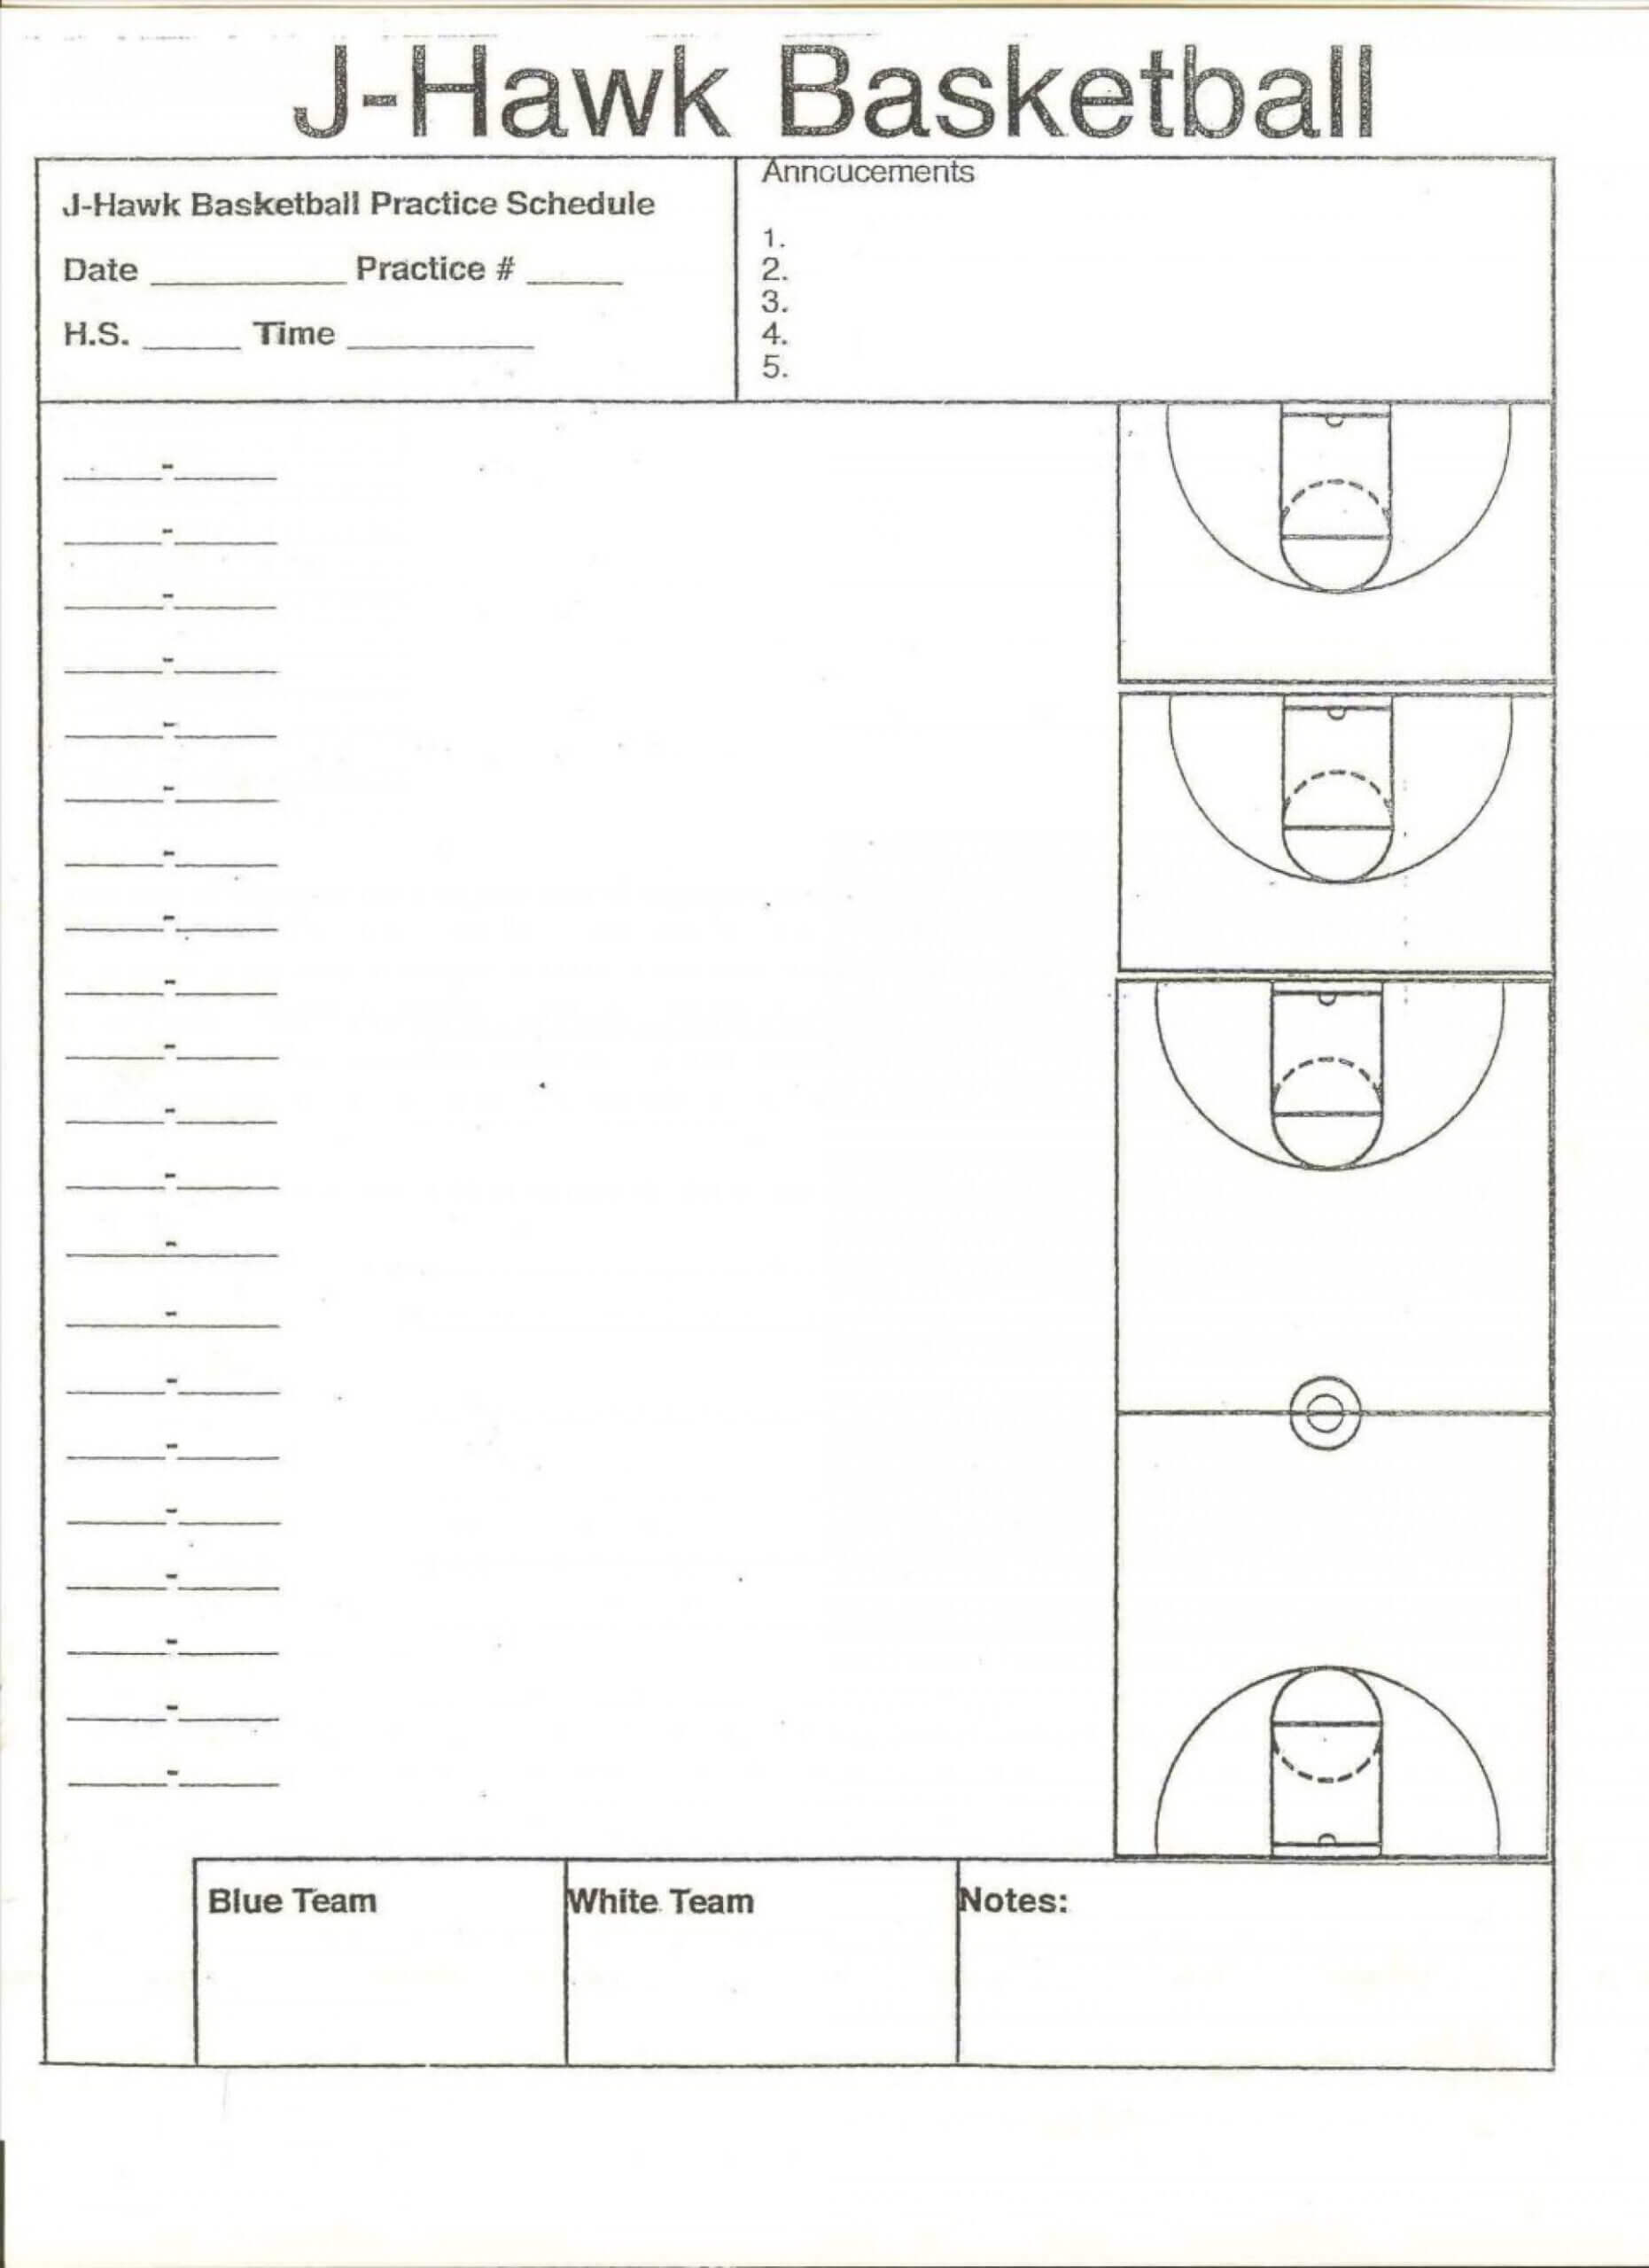 012 Template Ideas Culver Stockton Wbb Practice Plan With Blank Hockey Practice Plan Template